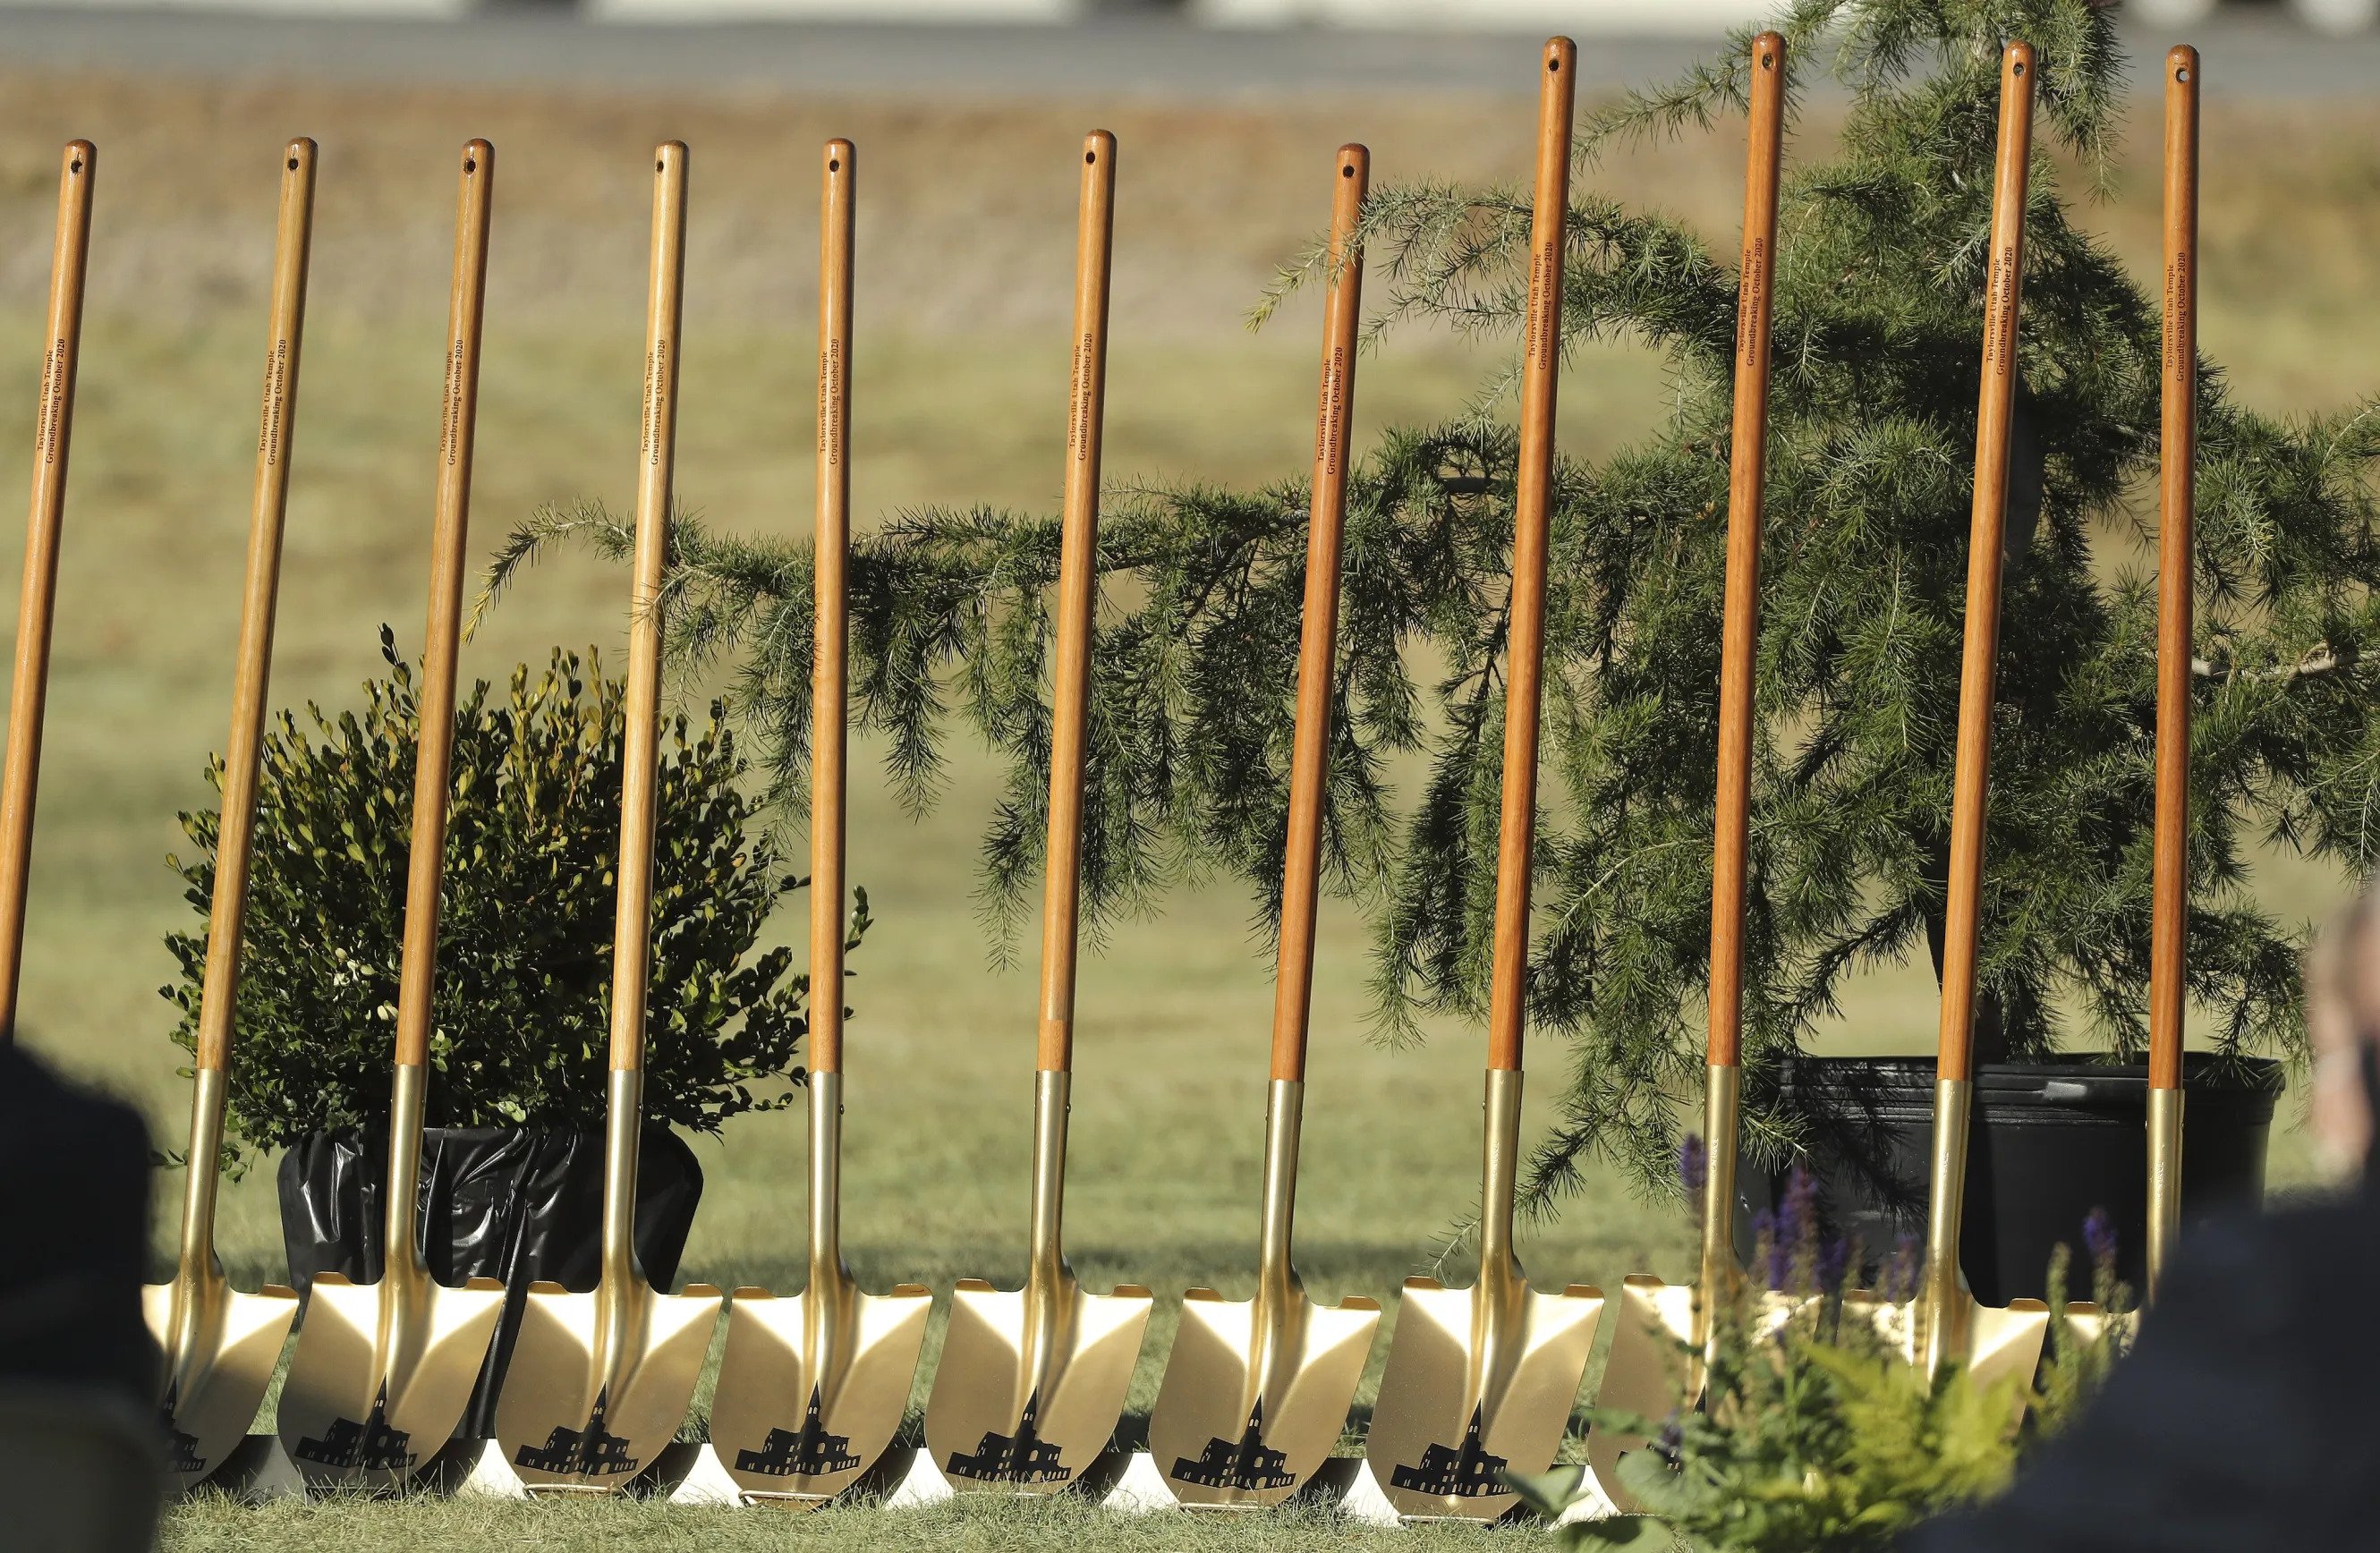 A line of ceremonial golden shovels standing up and lined up in a row.